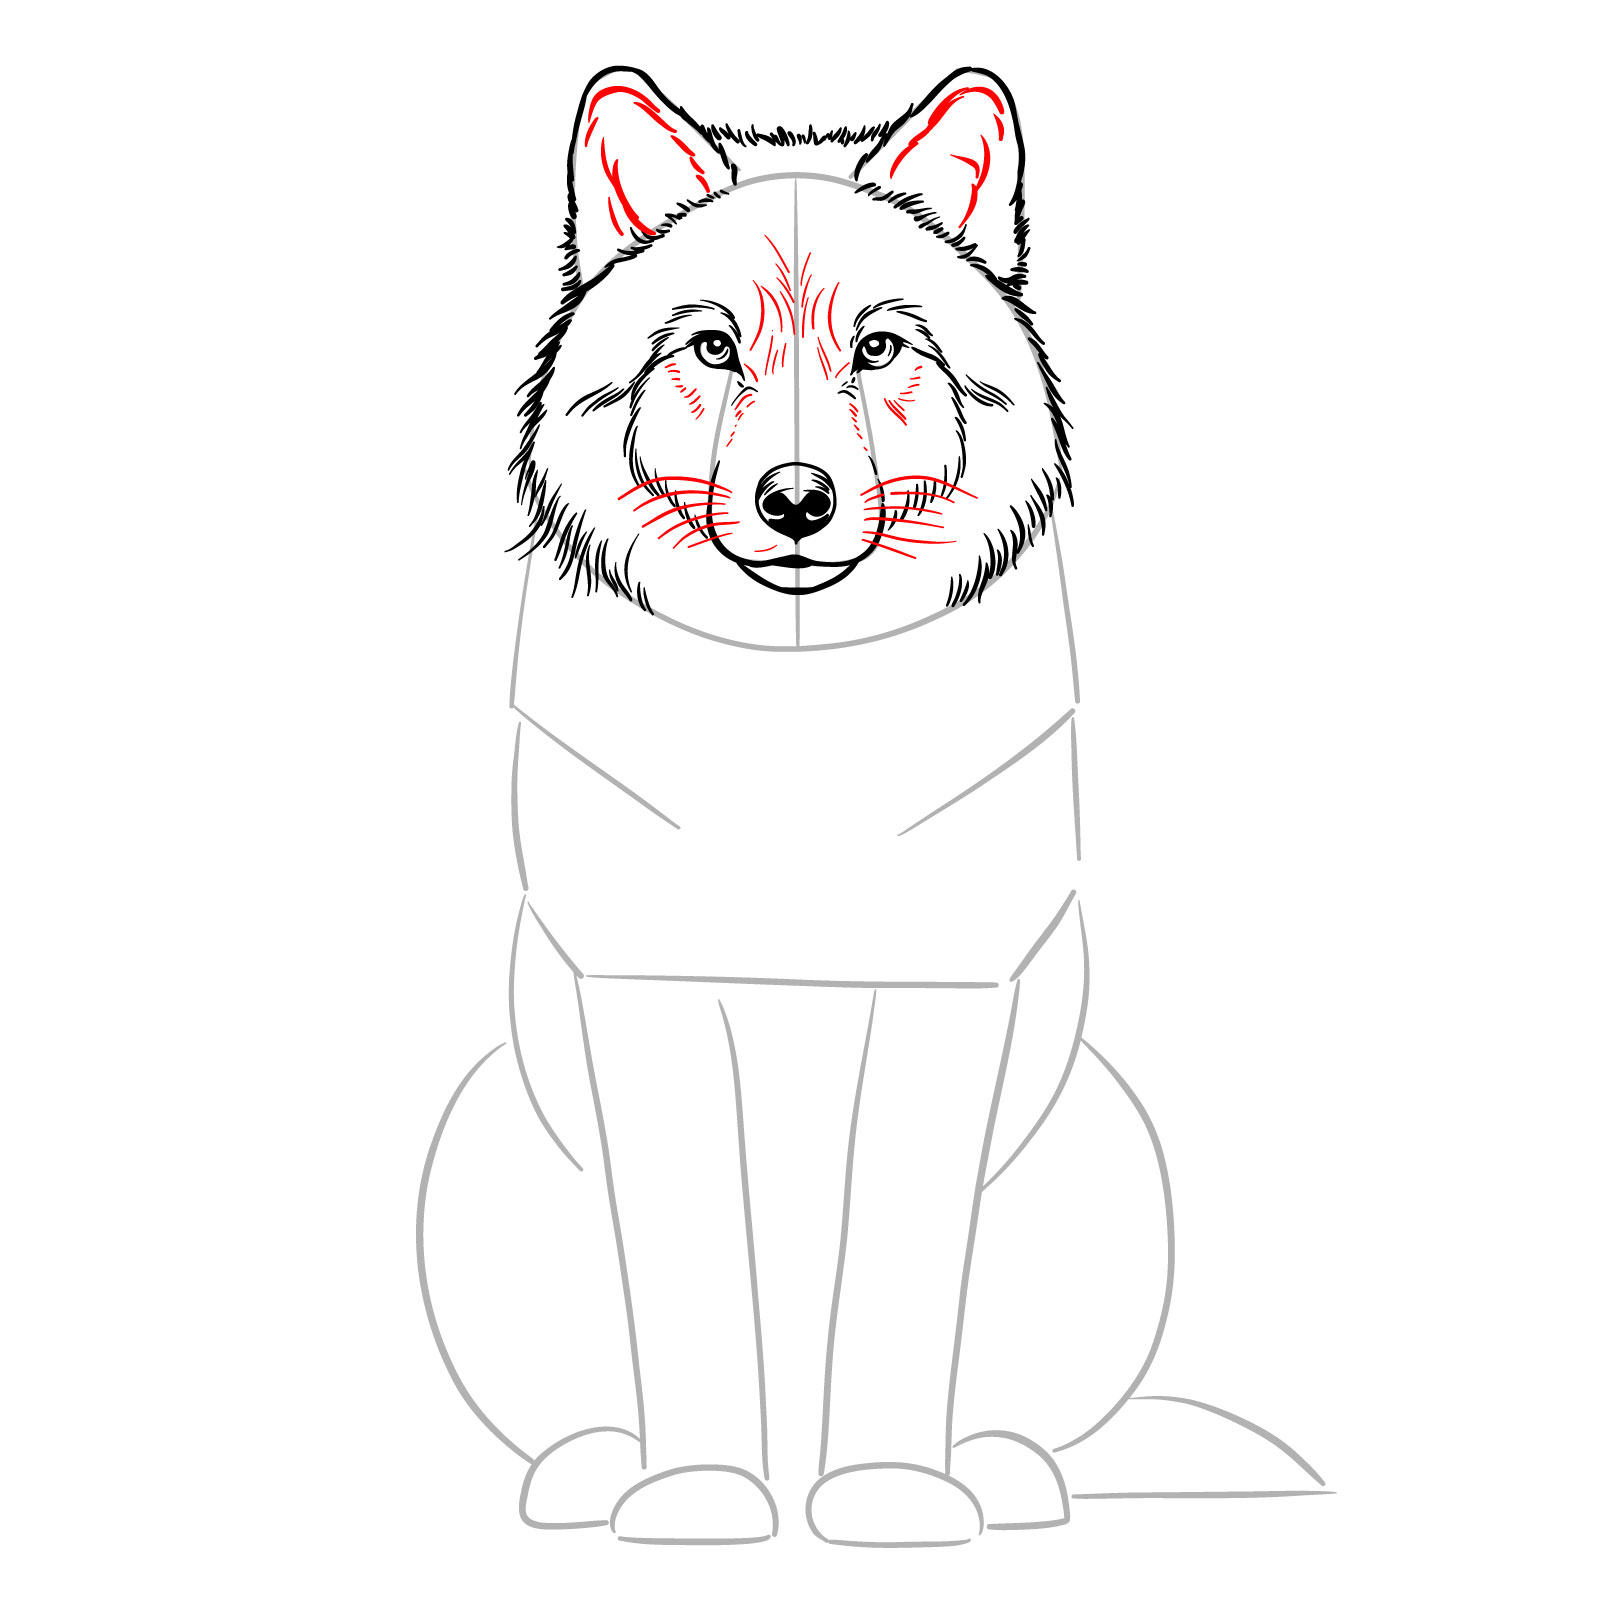 Adding whiskers and detailed fur to the snout in a sitting wolf drawing - step 09